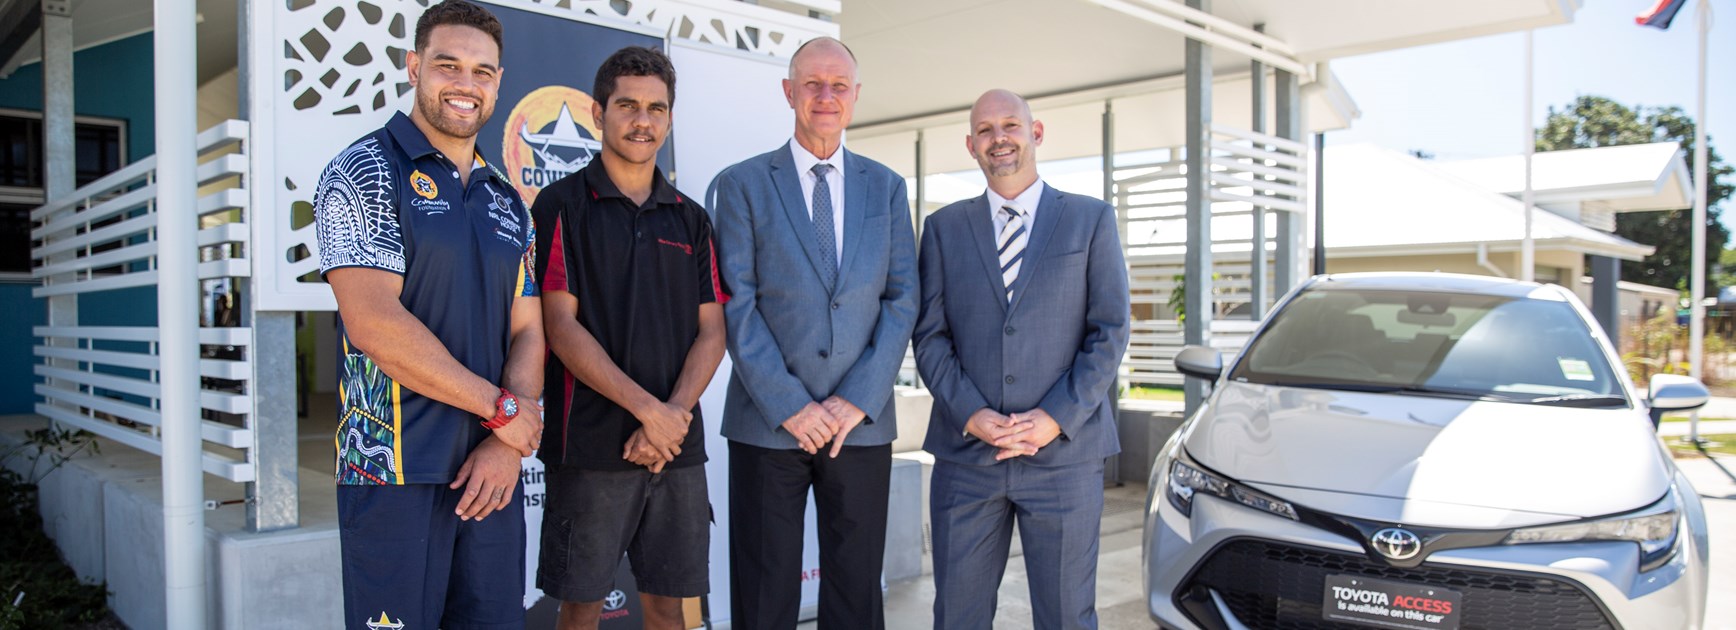 Toyota changing lives at NRL Cowboys House